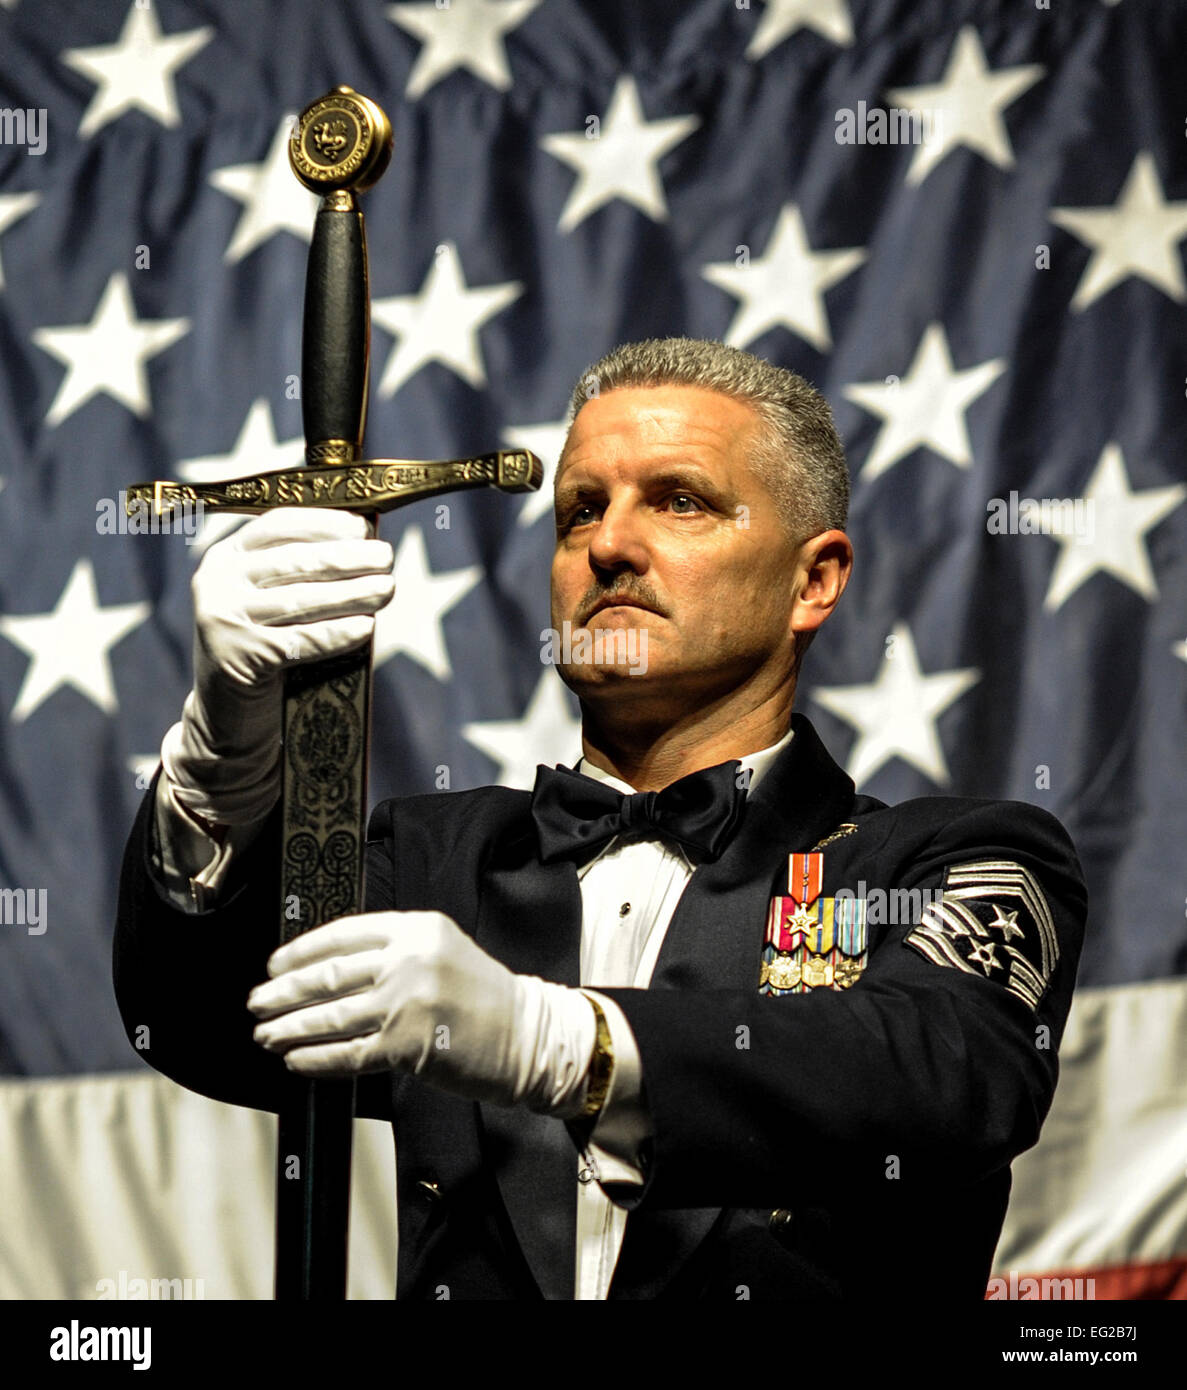 Chief Master Sgt. Bruce Nixon holds the sword that was presented to retired Gen. Norton Schwartz during an Order of the Sword ceremony on Okaloosa Island, Fla., Feb.1, 2013. The Order of the Sword is an honor awarded by the NCOs of a command to recognize individuals they hold in high esteem and for their contributions to the enlisted corps. Nixon is the command chief of 24th Special Operations Wing. Airman 1st Class Christopher Callaway Stock Photo